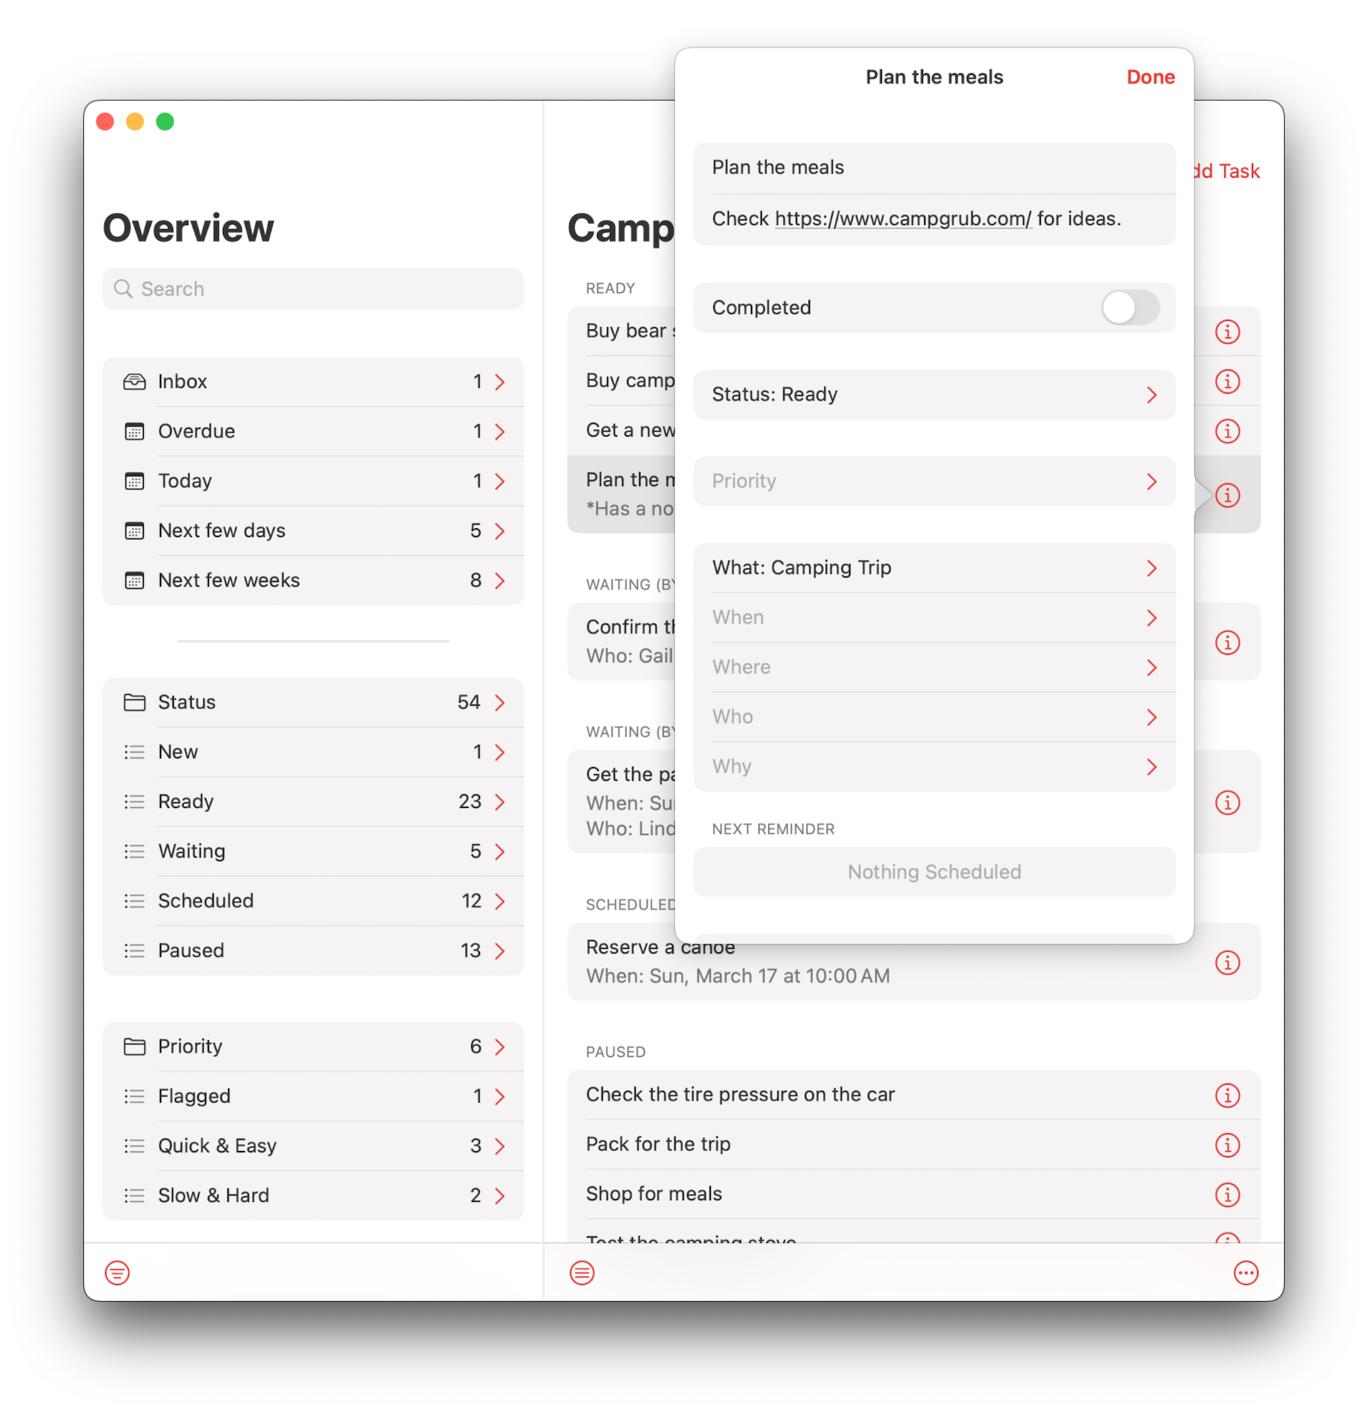 Task View — Plan the meals